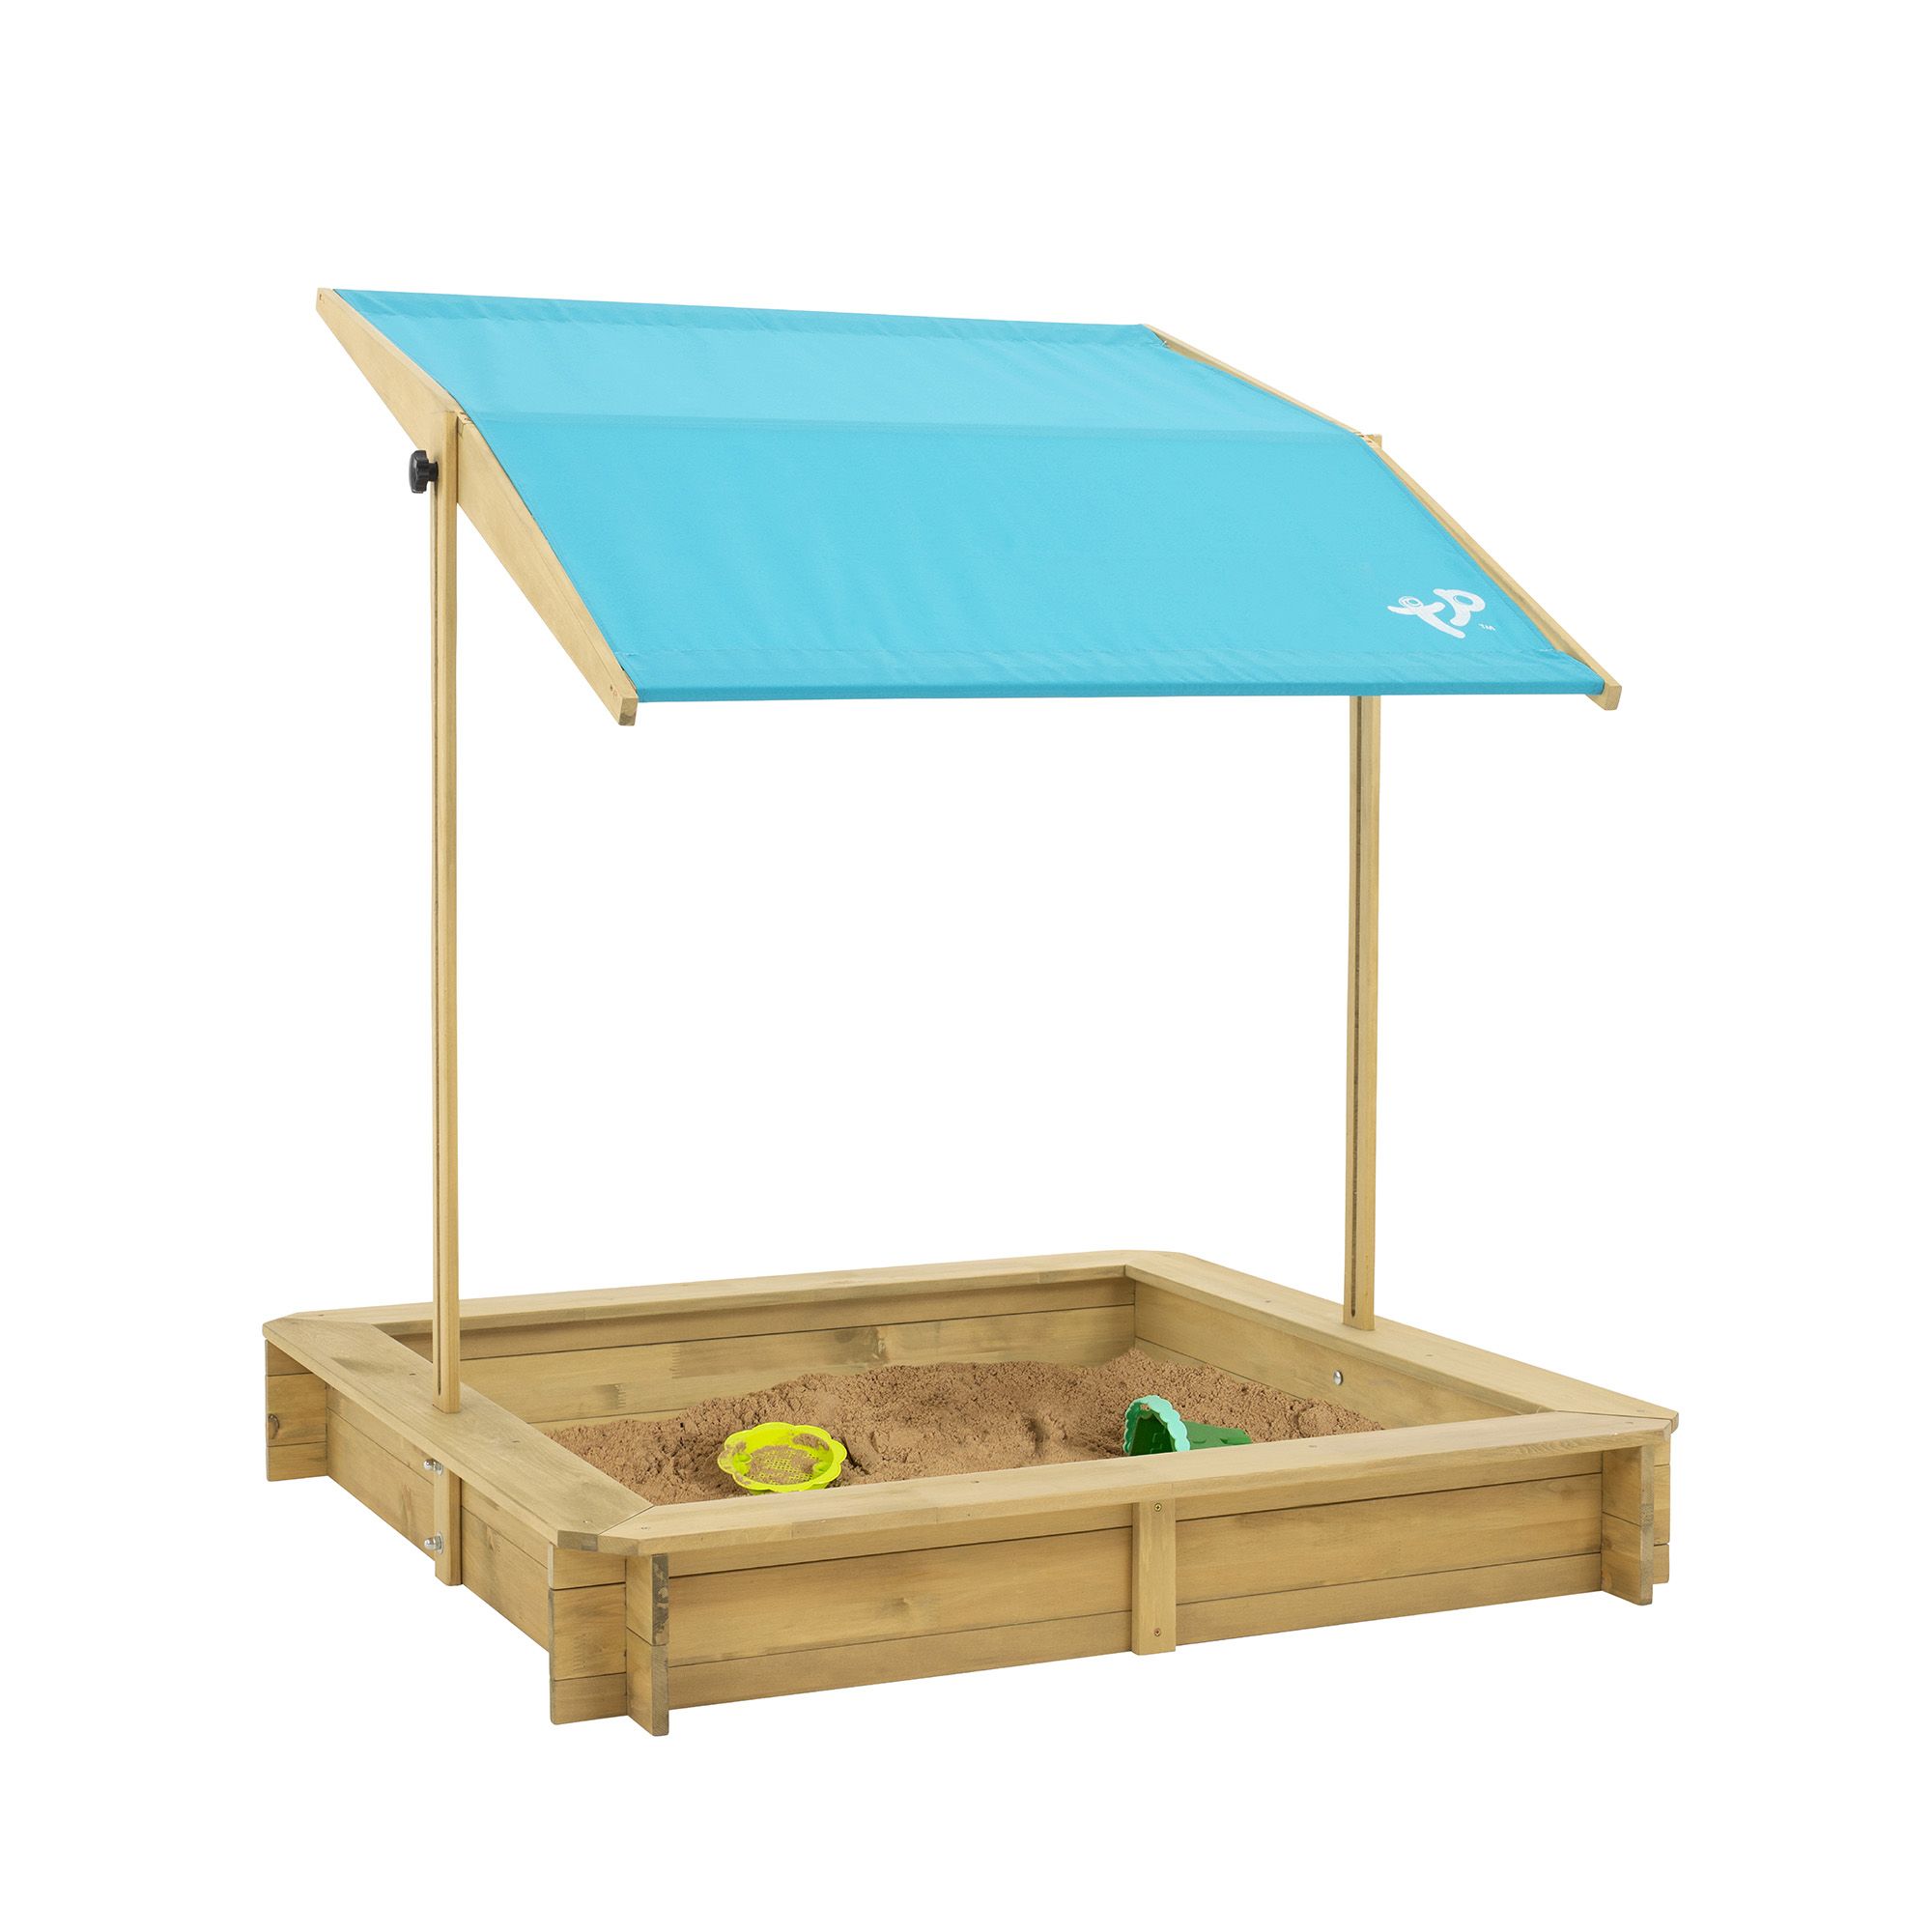 TP Toys Timber Rectangular Sand pit with Canopy